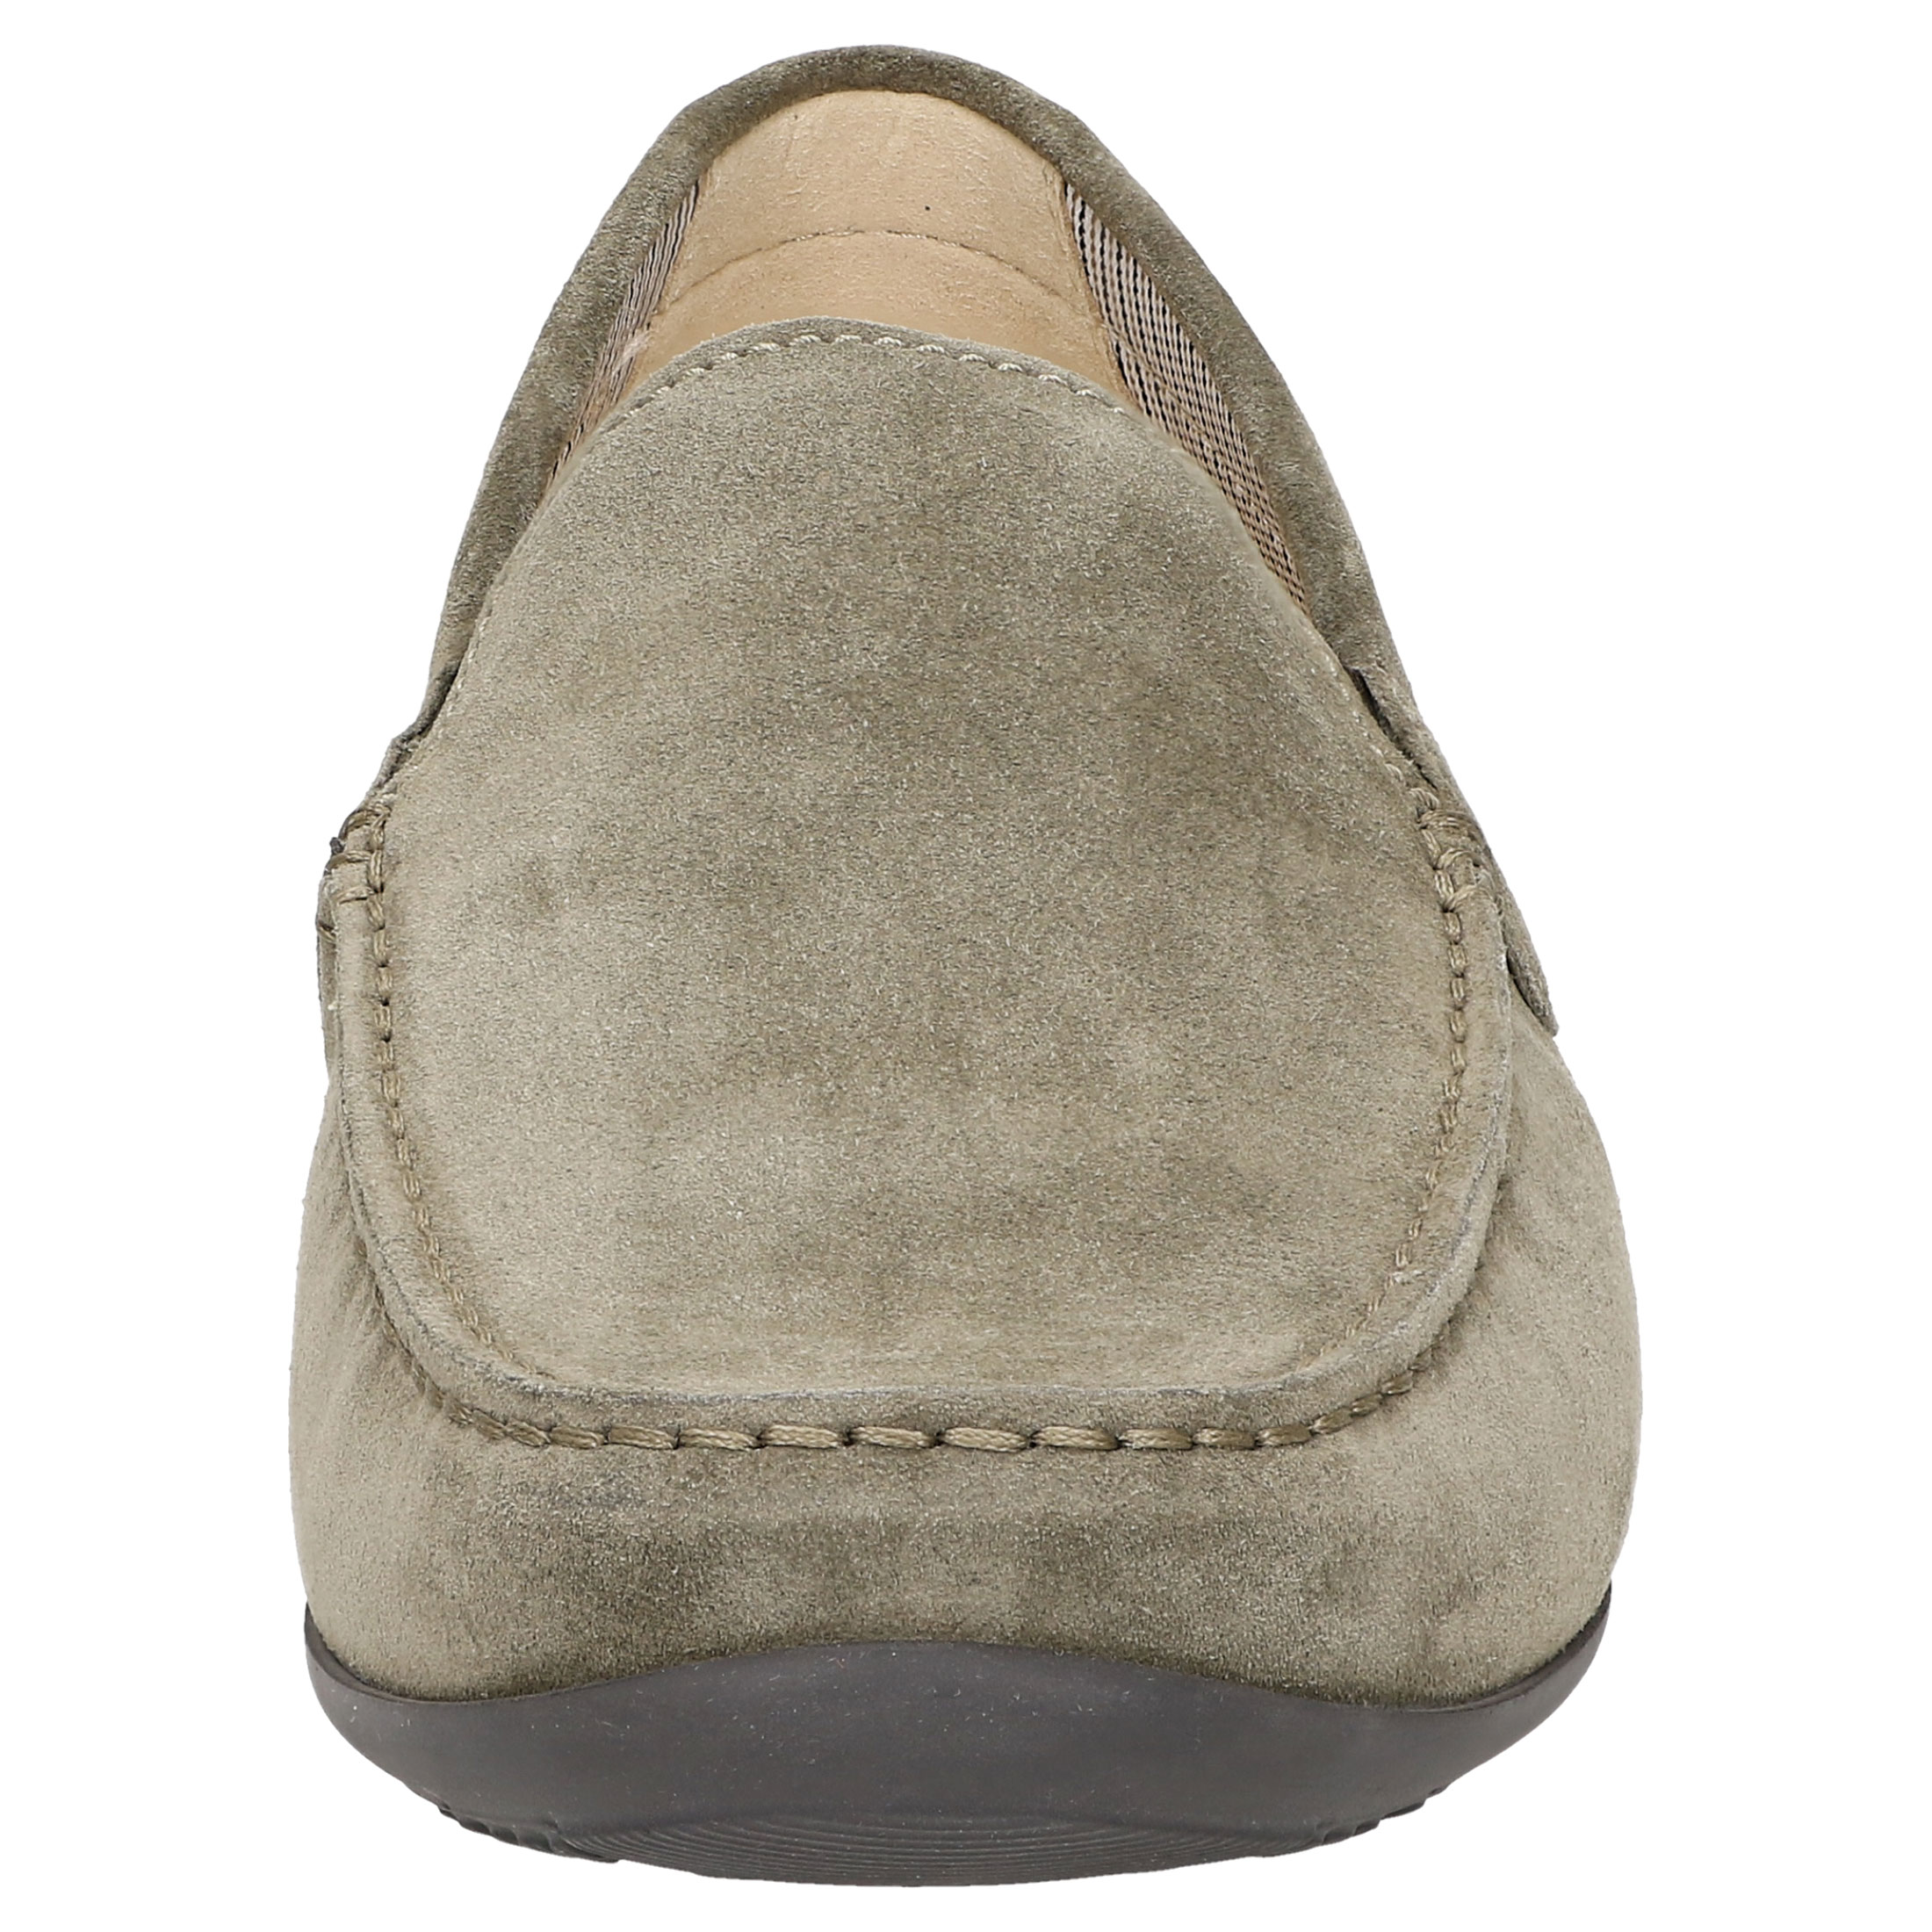 Giumelo 700 - Schlamm suede leather